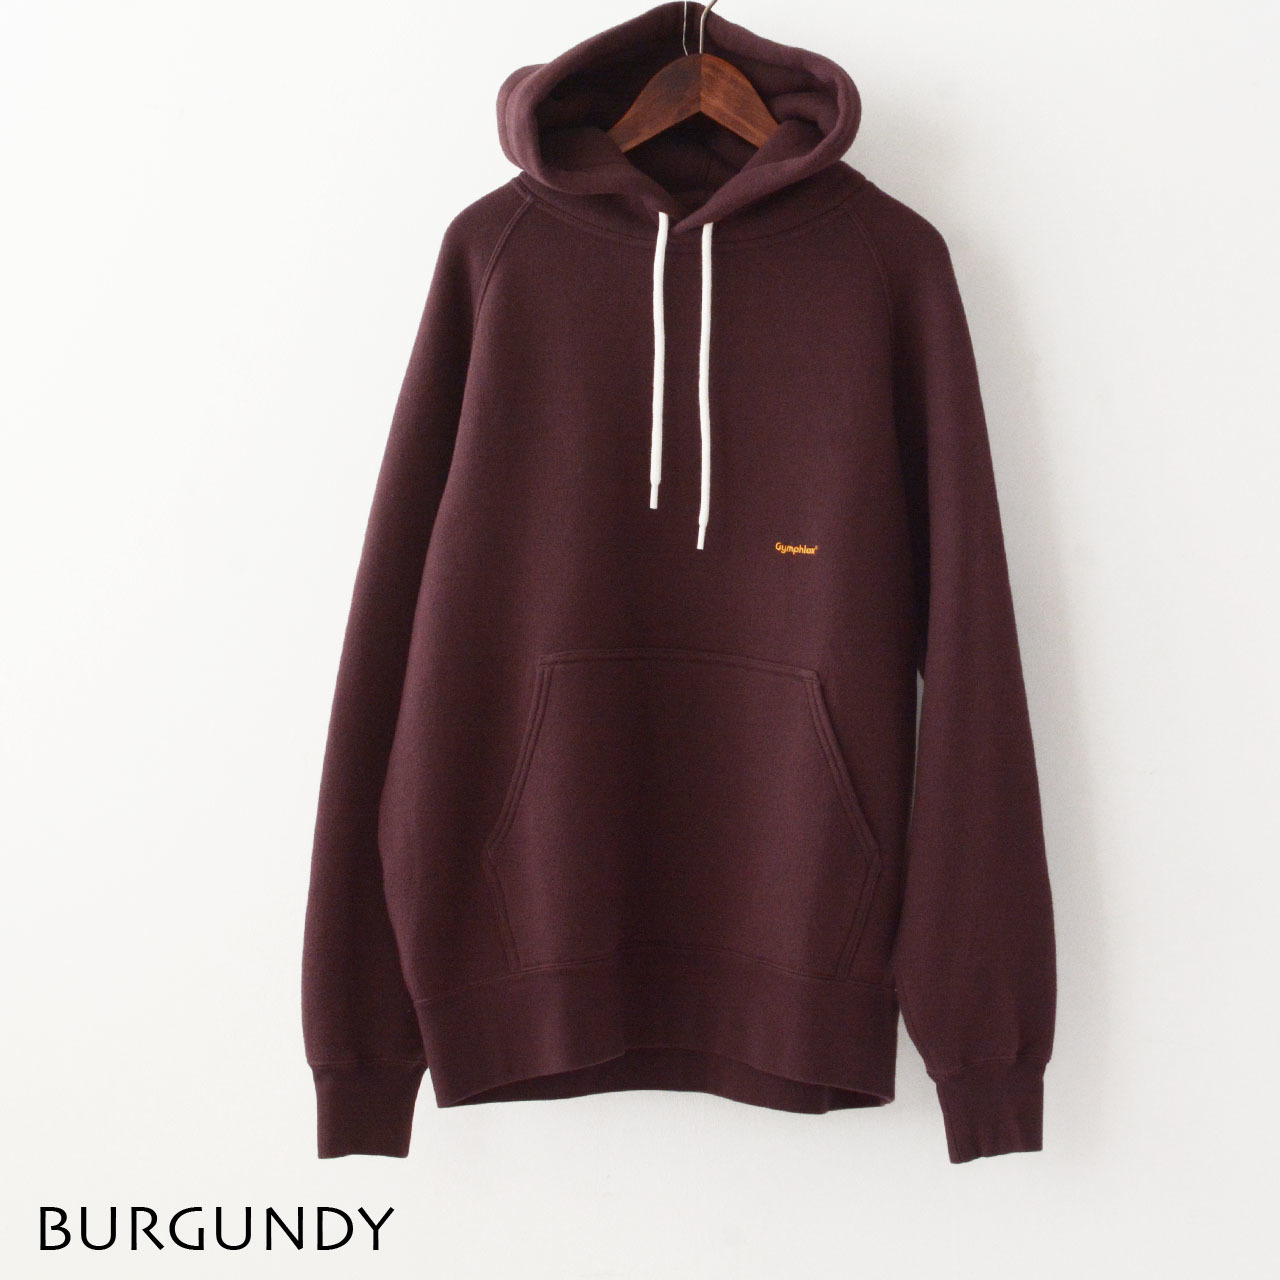 Gymphlex [ジムフレックス] SWING SLEEVE PULLOVER HOODIE [GY-C0002 ARB]_f0051306_13480039.jpg